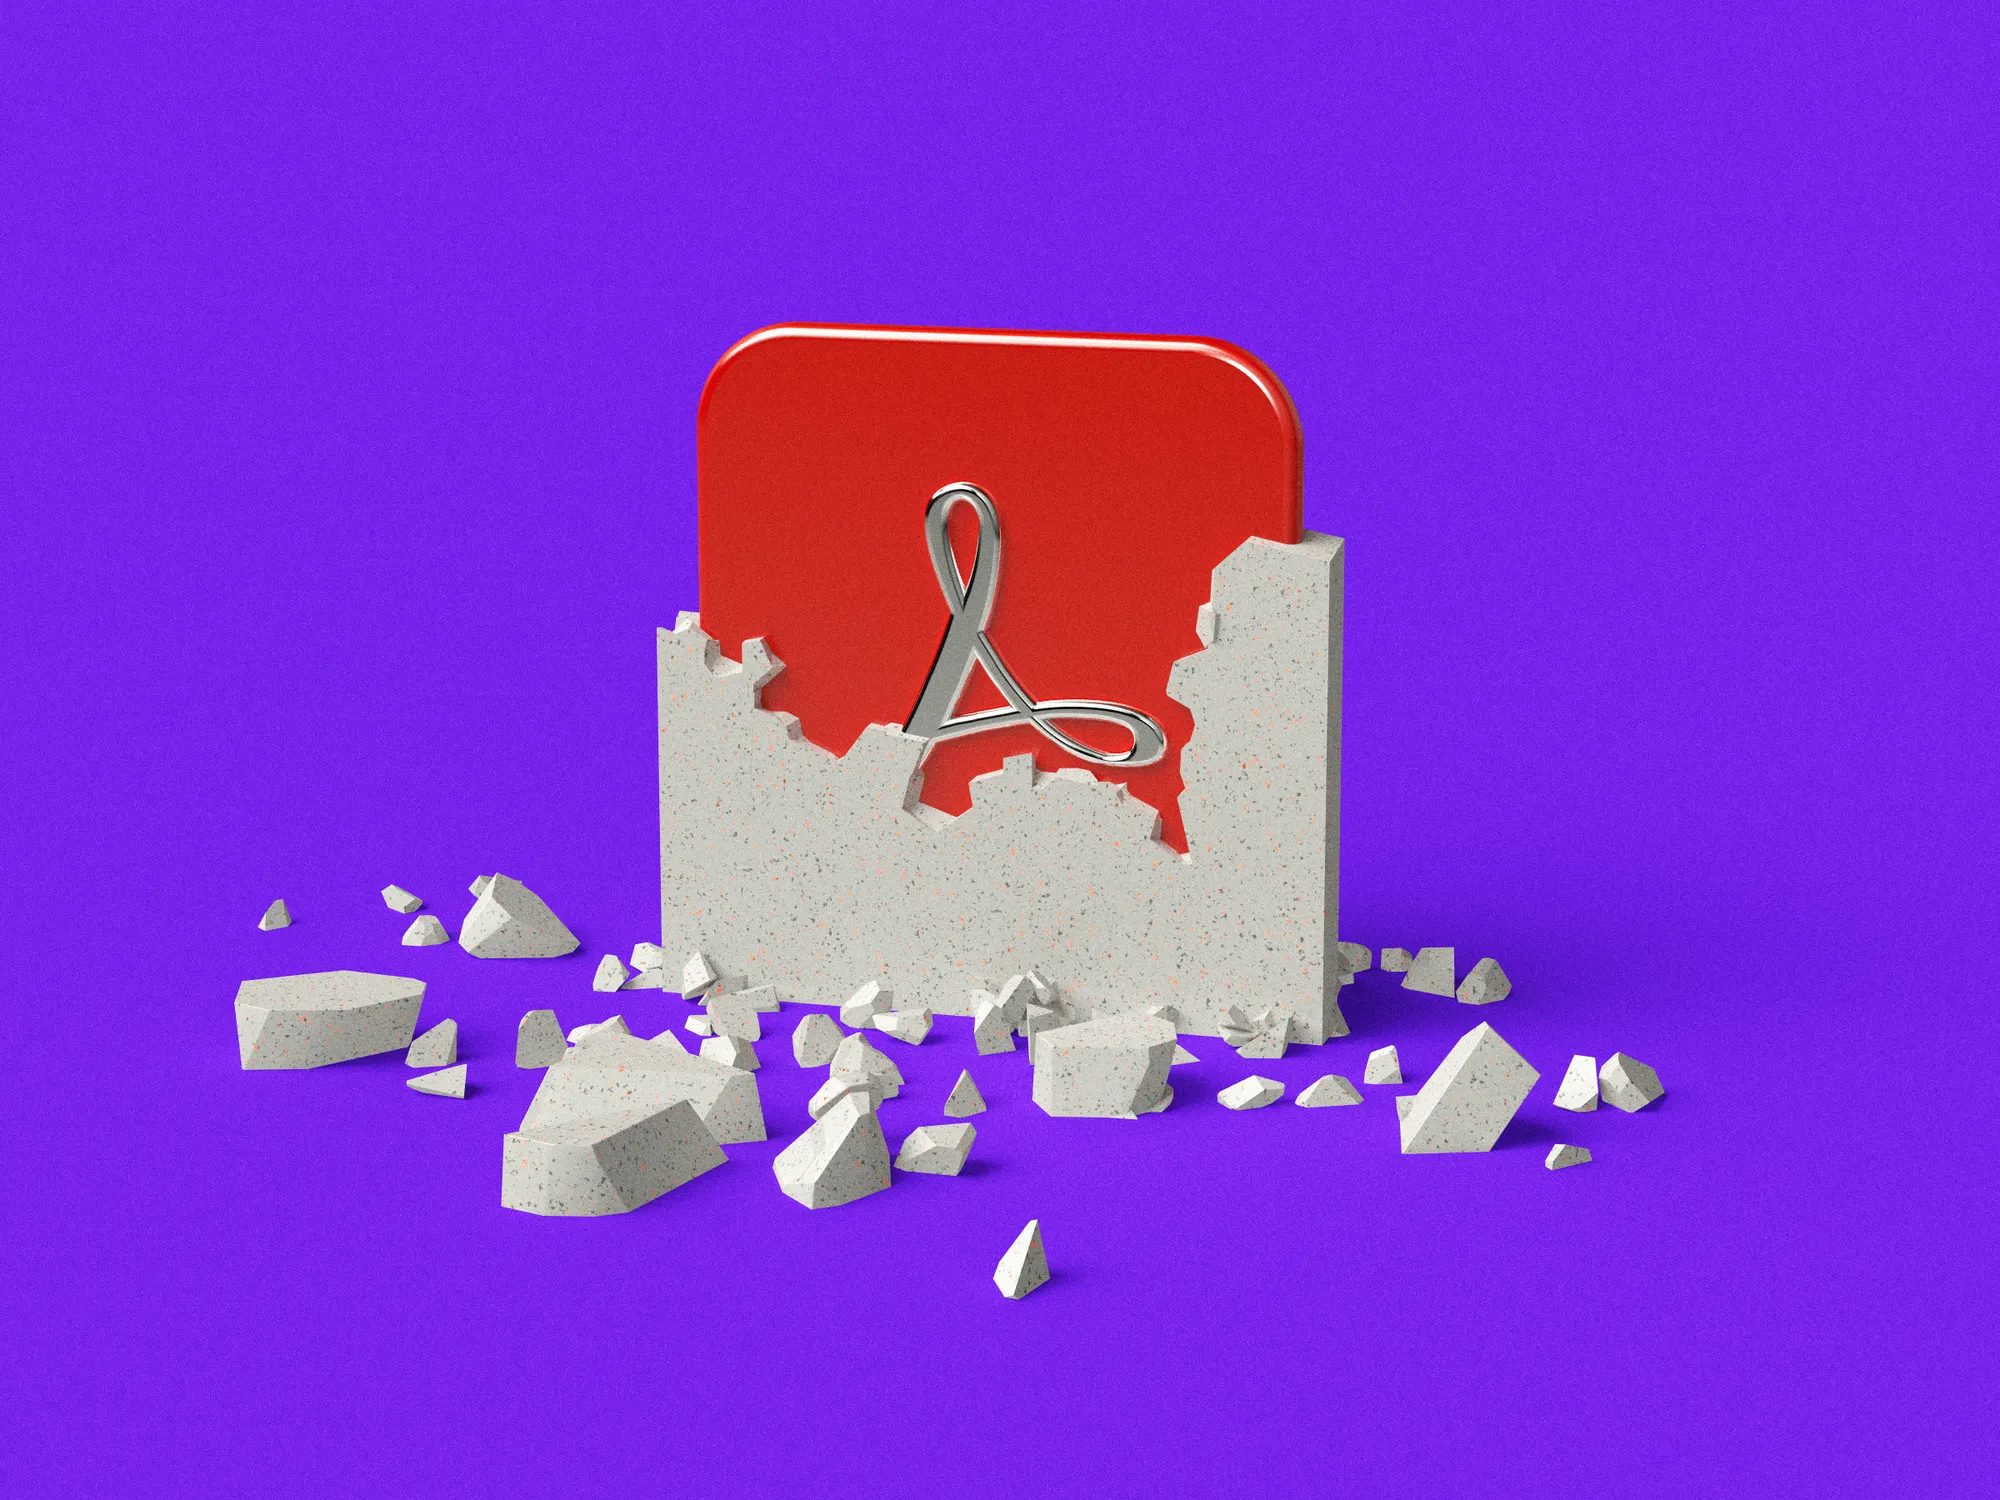 On a purple background an illustration of the Adobe Acrobat logo being sculpted from a slab of stone.